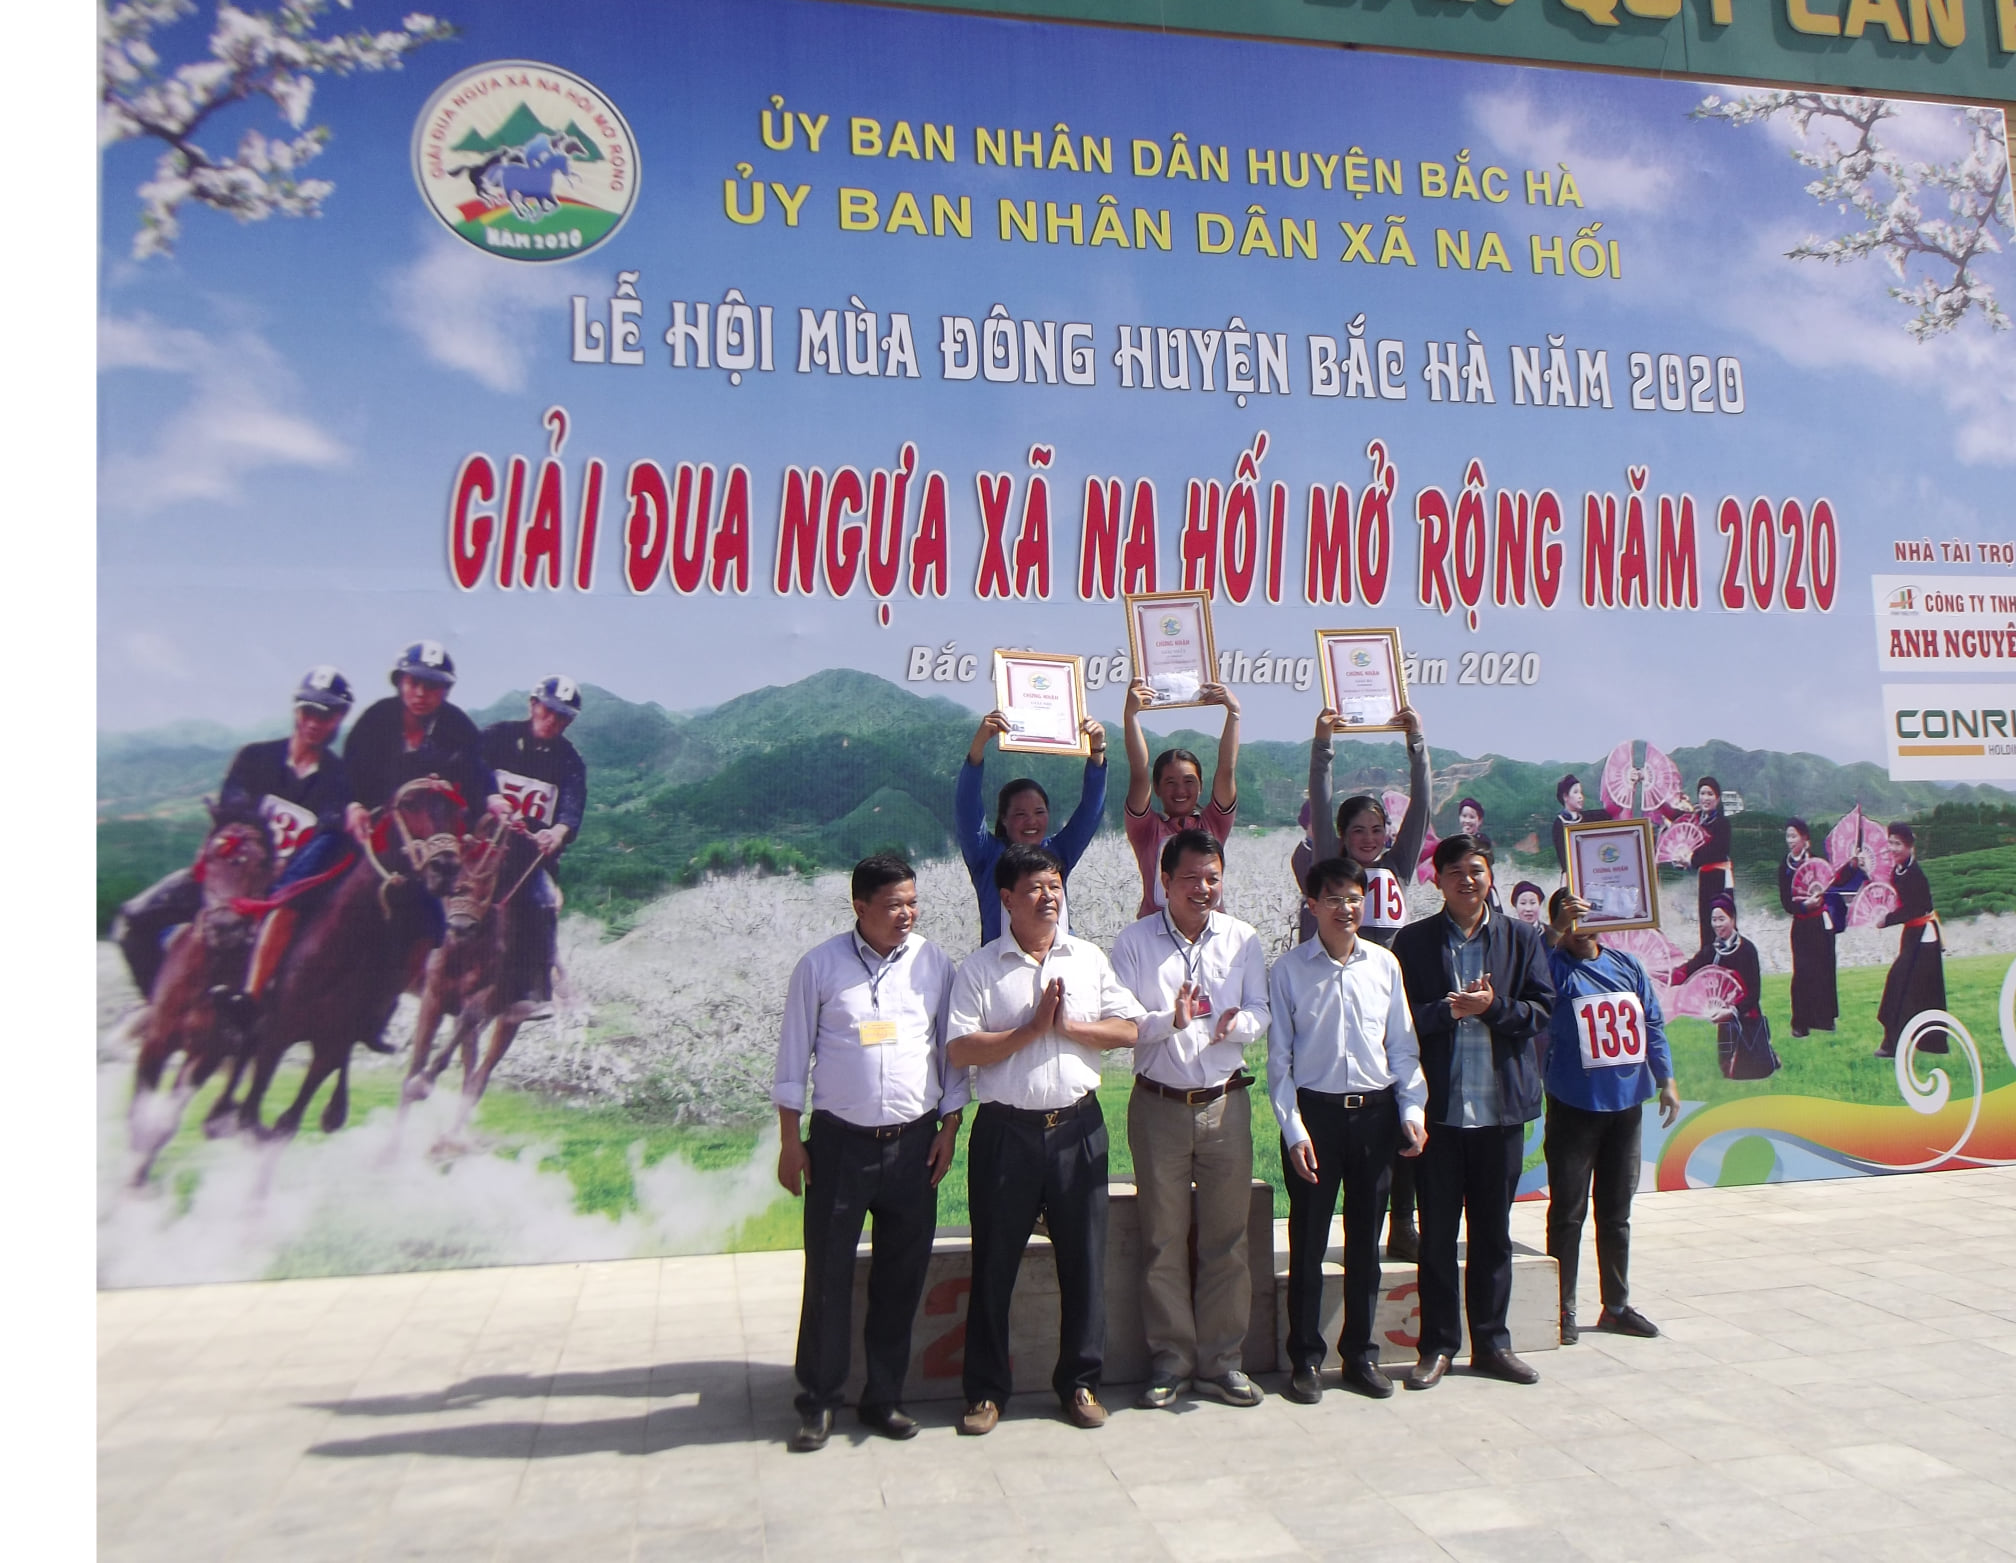 Results of the 1st Na Hoi Open Commune Horse Race - Bac Ha Winter Festival 2020